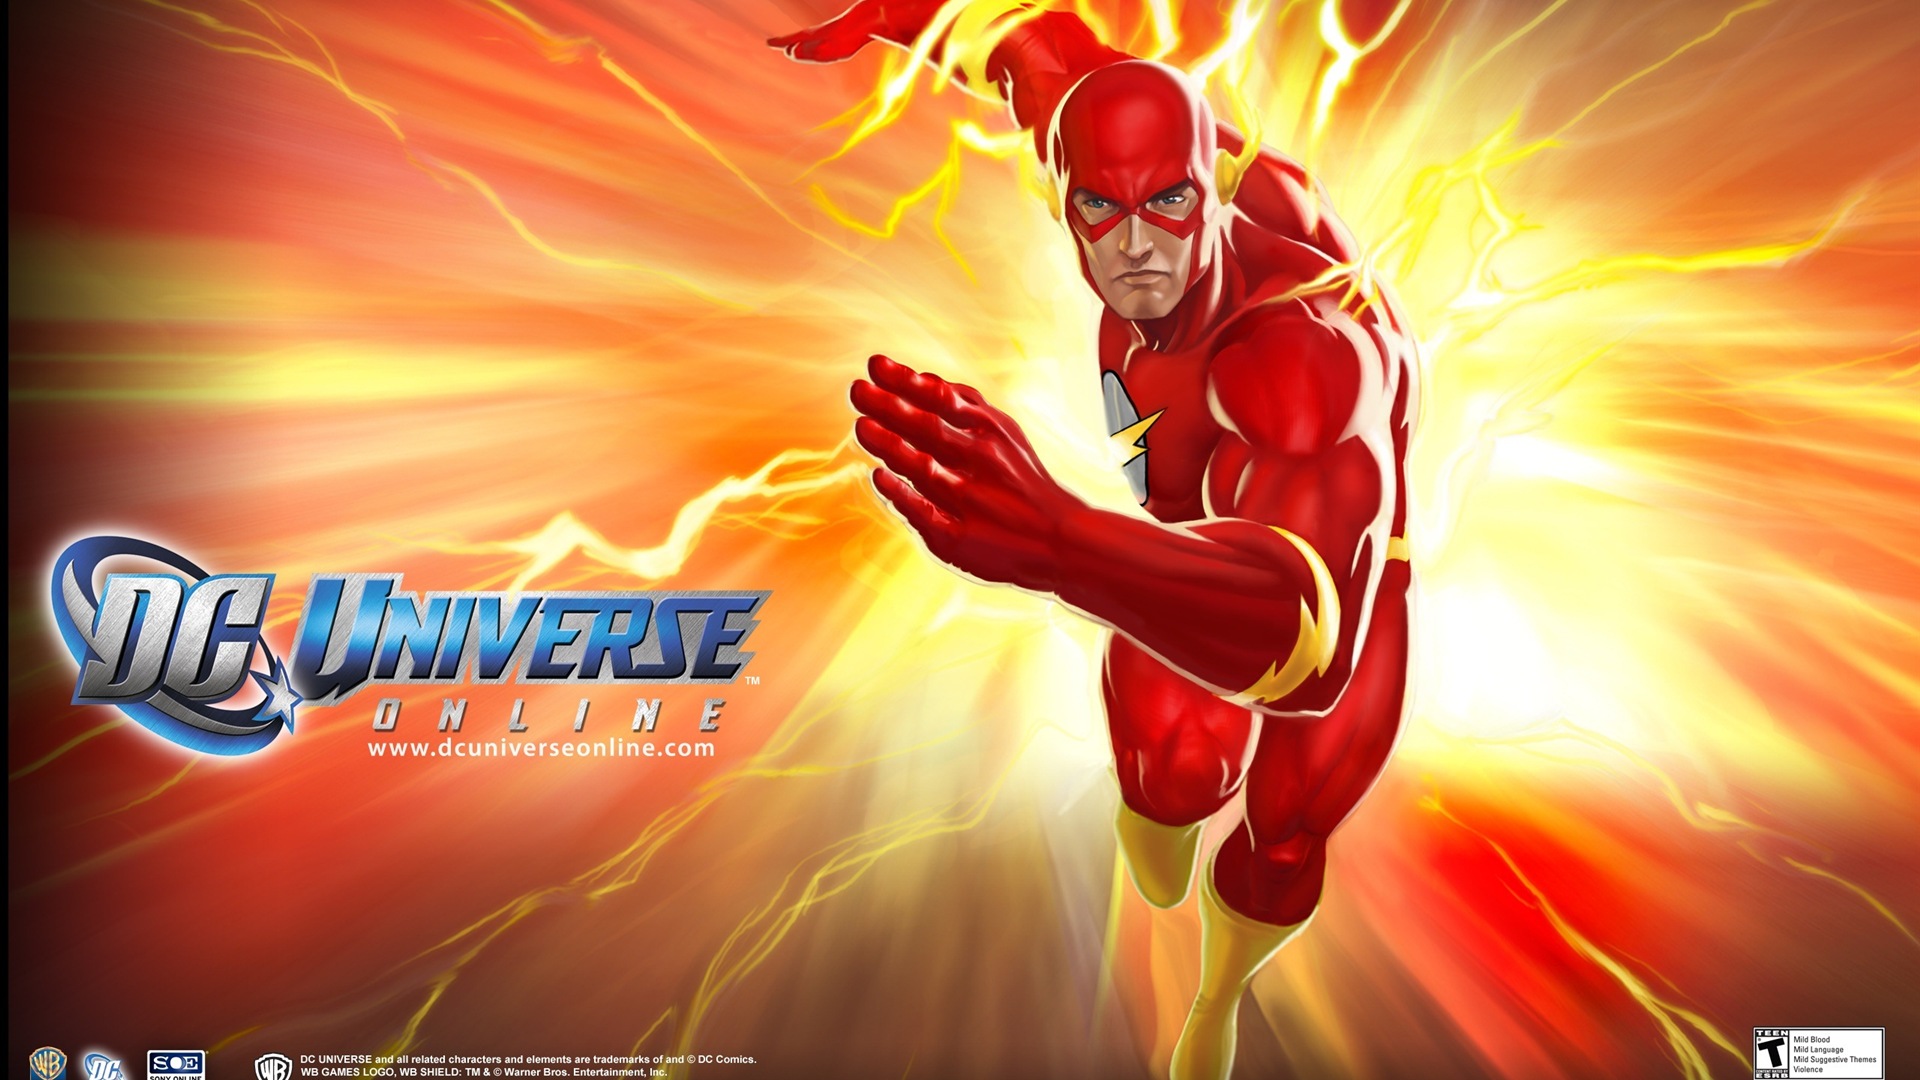 DC Universe Online HD game wallpapers #16 - 1920x1080